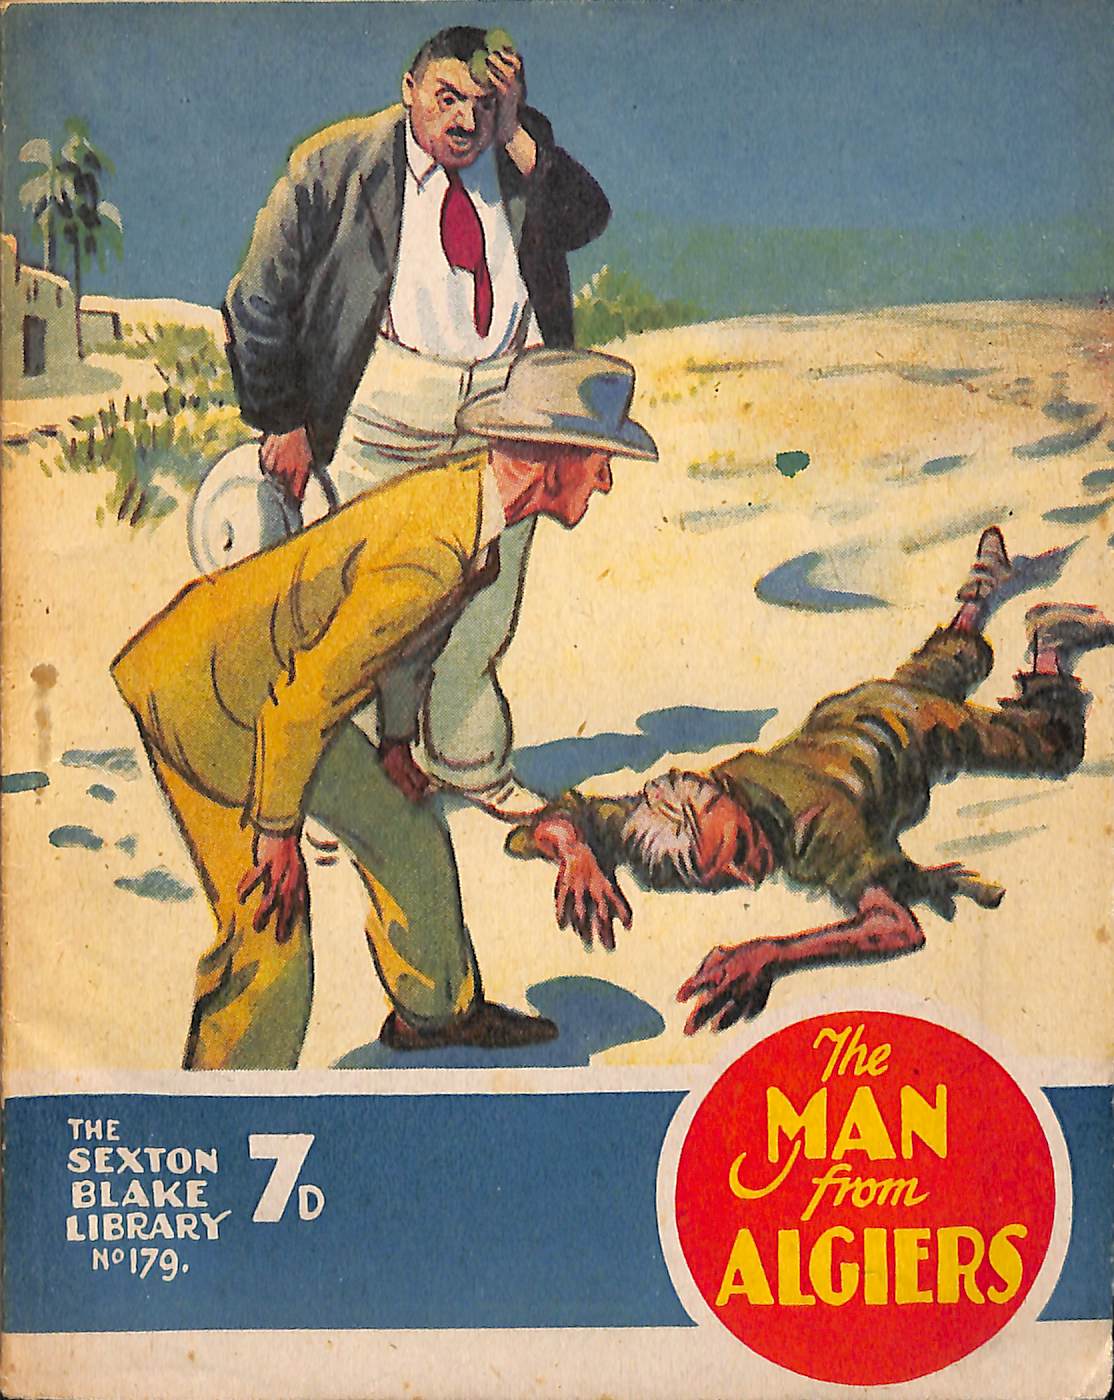 Book Cover For Sexton Blake Library S3 179 - The Man from Algiers